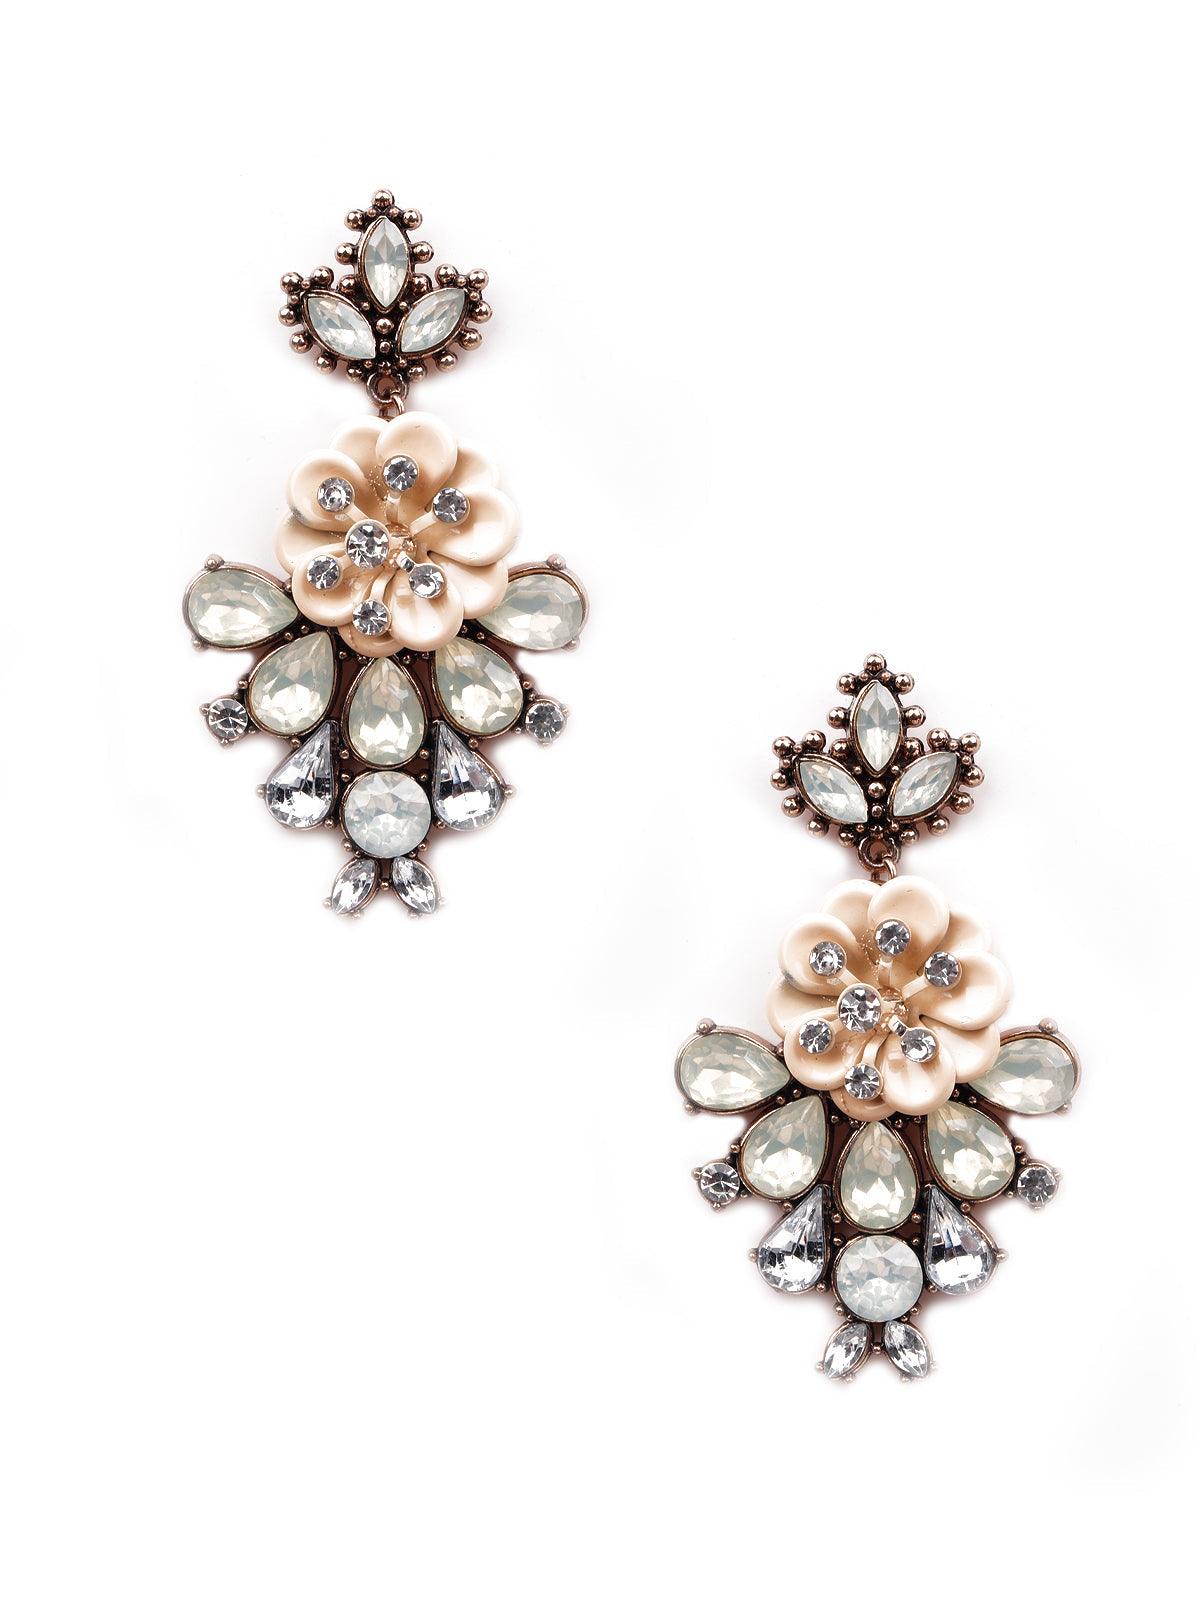 Women's Exquisite Beautiful Floral Beaded Statement Earrings - Odette